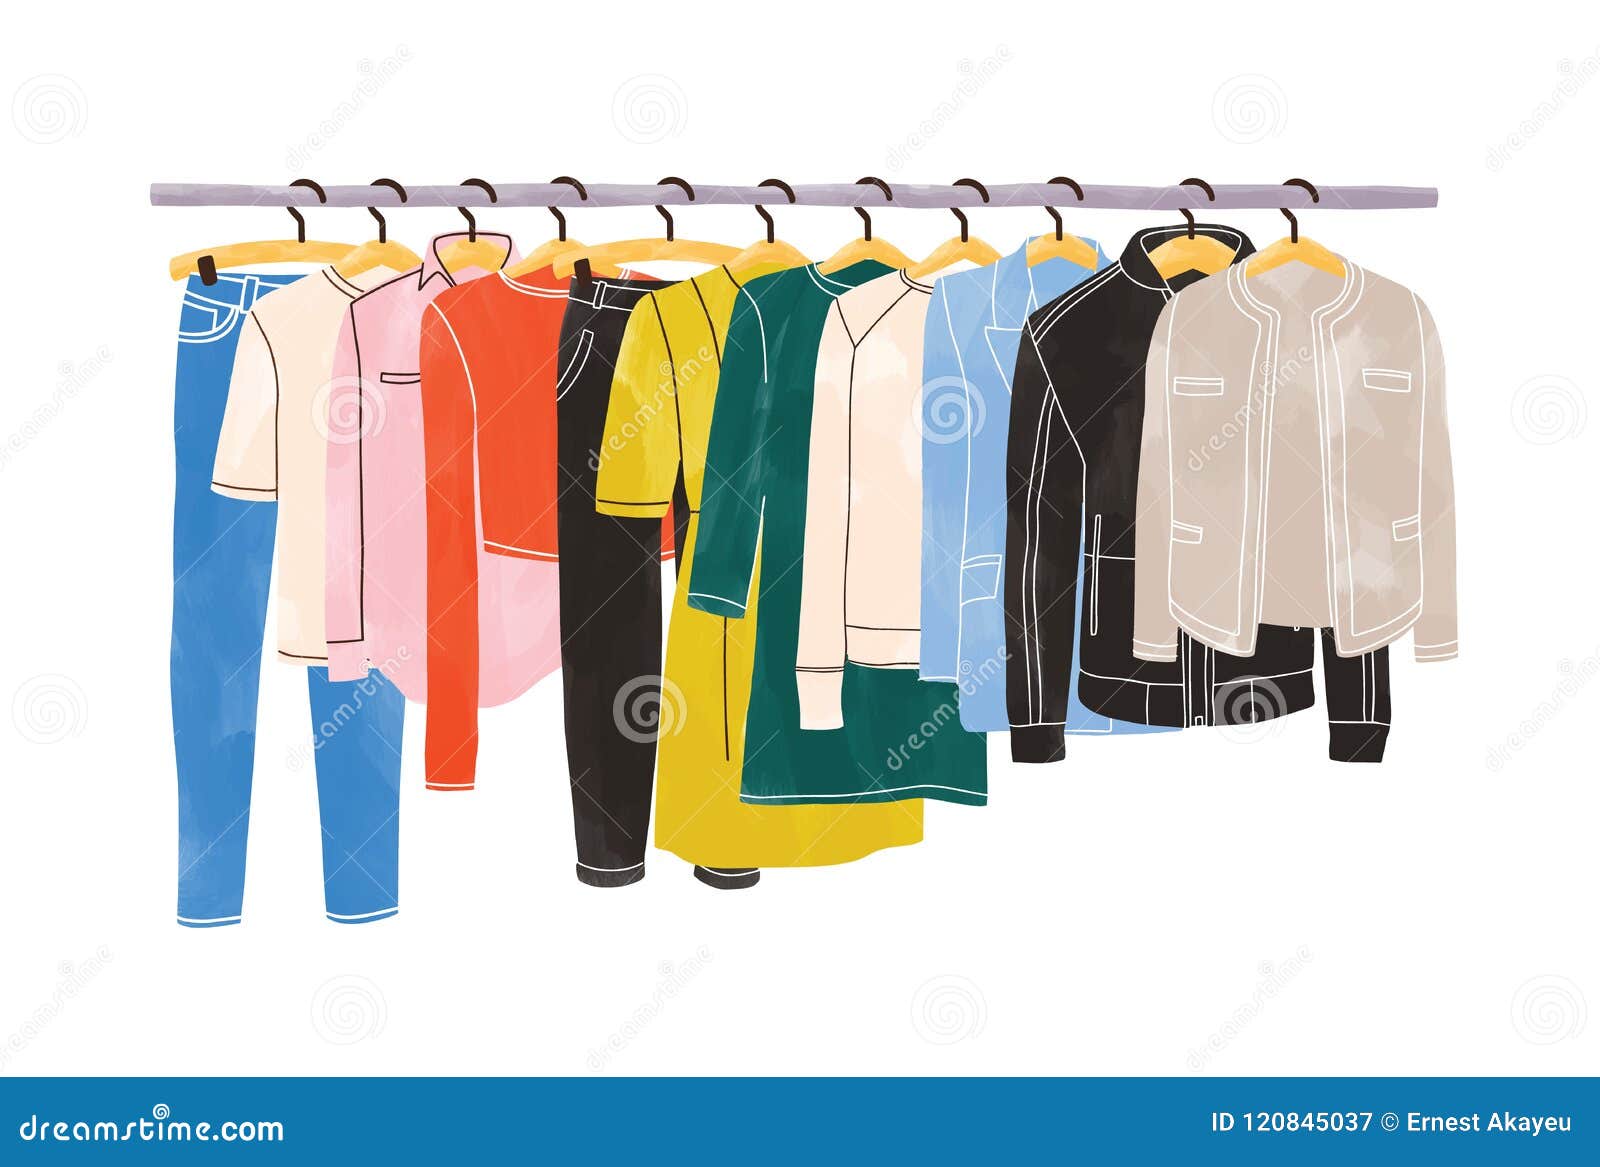 colored clothes or apparel hanging on hangers on garment rack or rail  on white background. clothing